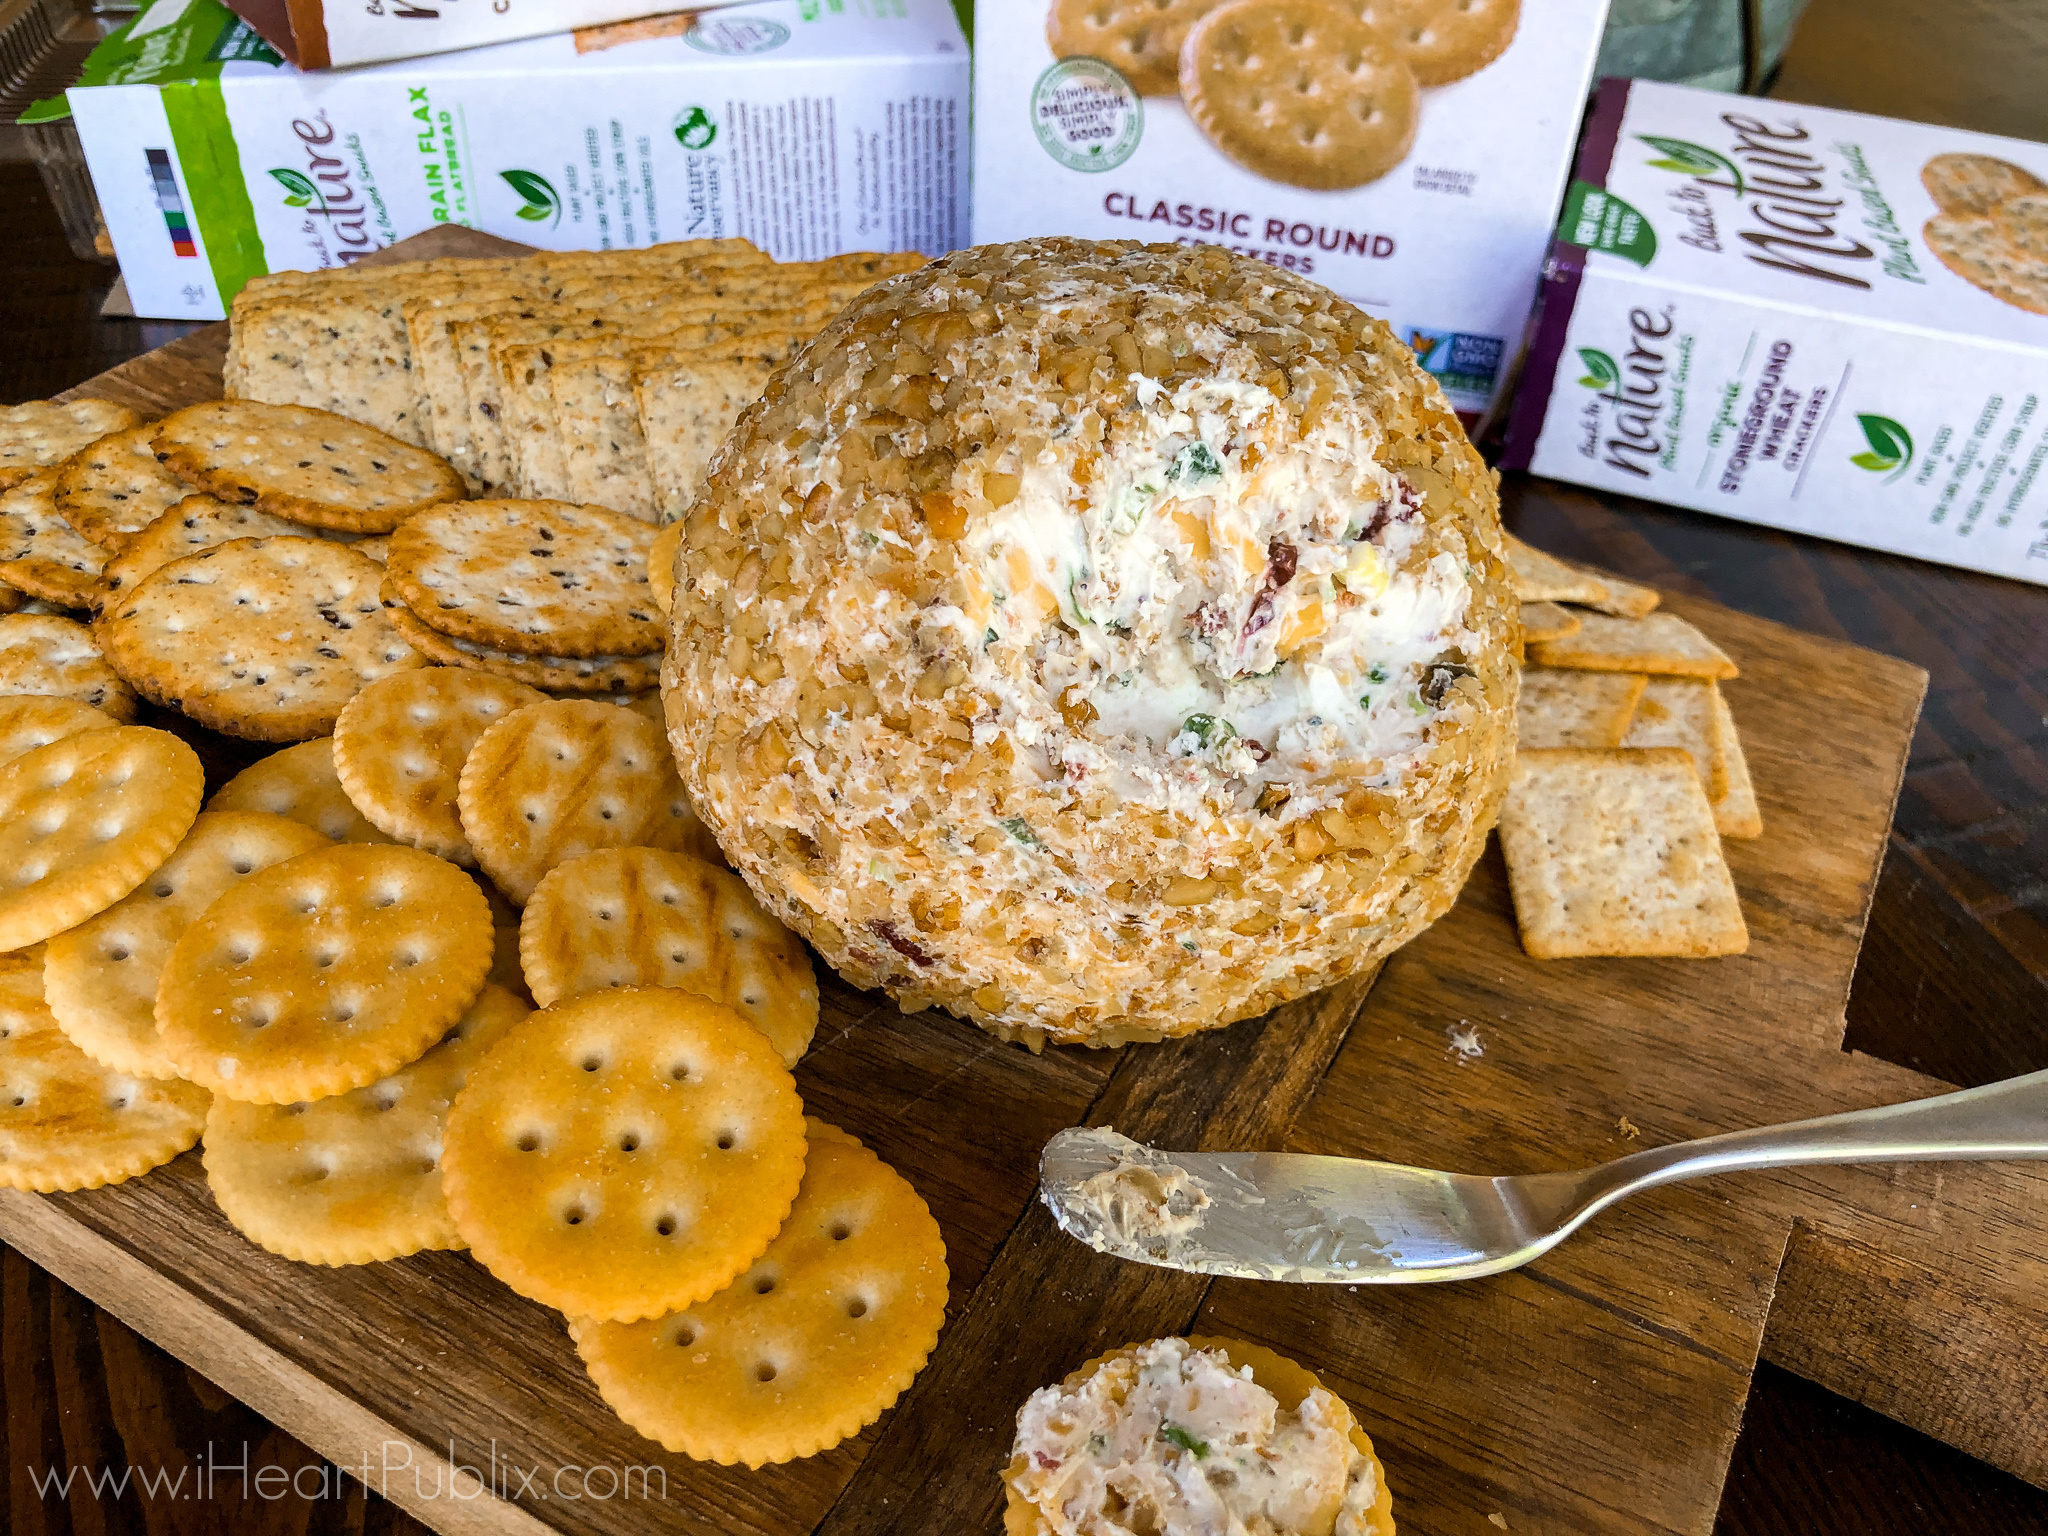 Grab Your Back To Nature Crackers To Enjoy With My Harvest Cheese Ball